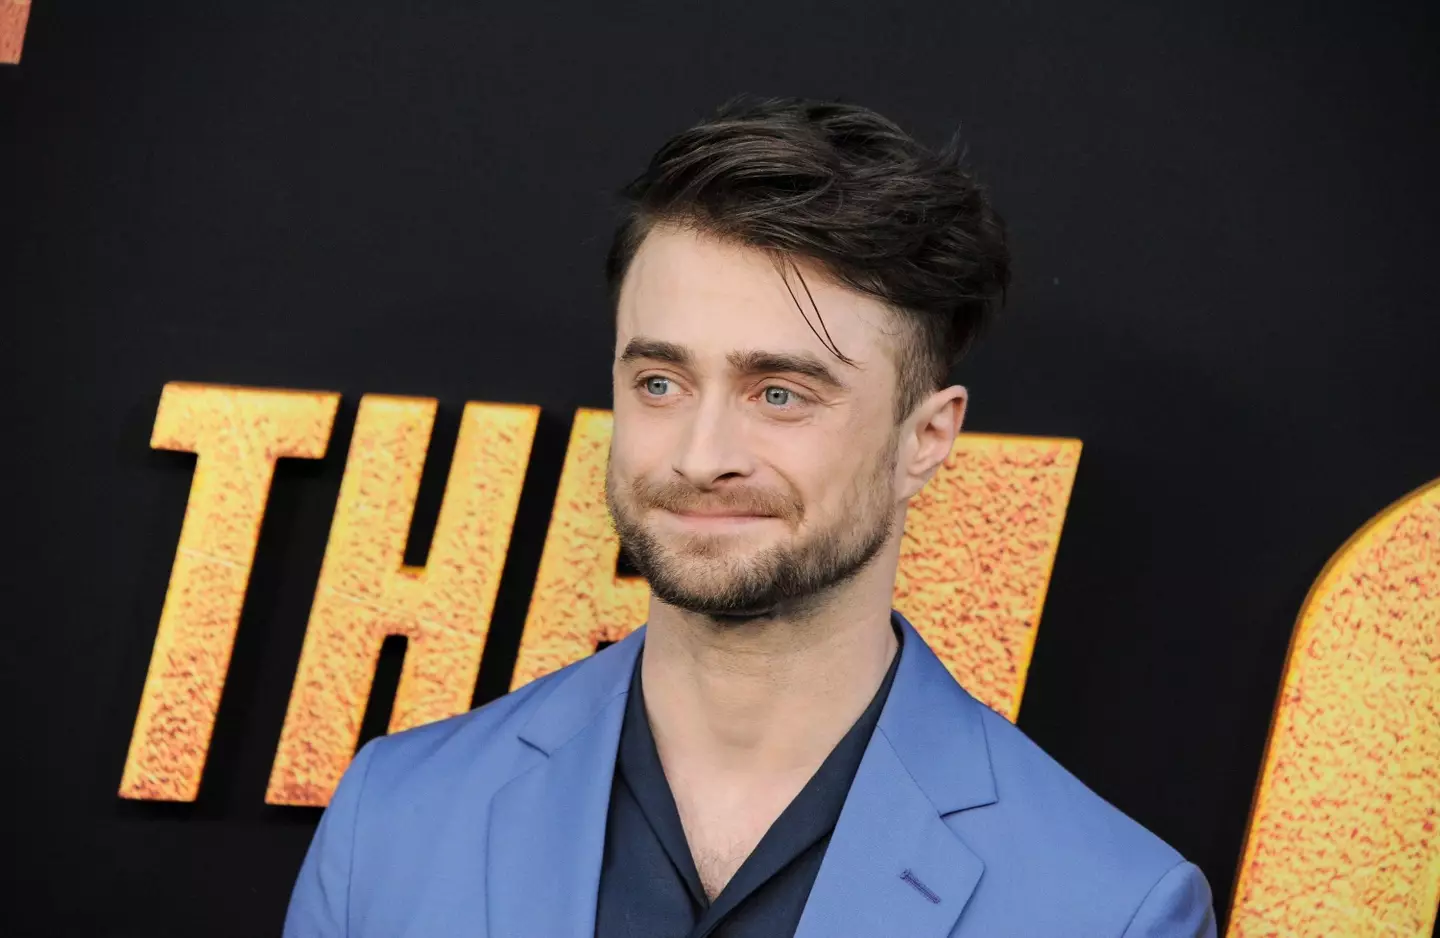 Daniel Radcliffe did not completely rule out the possibility of a return.